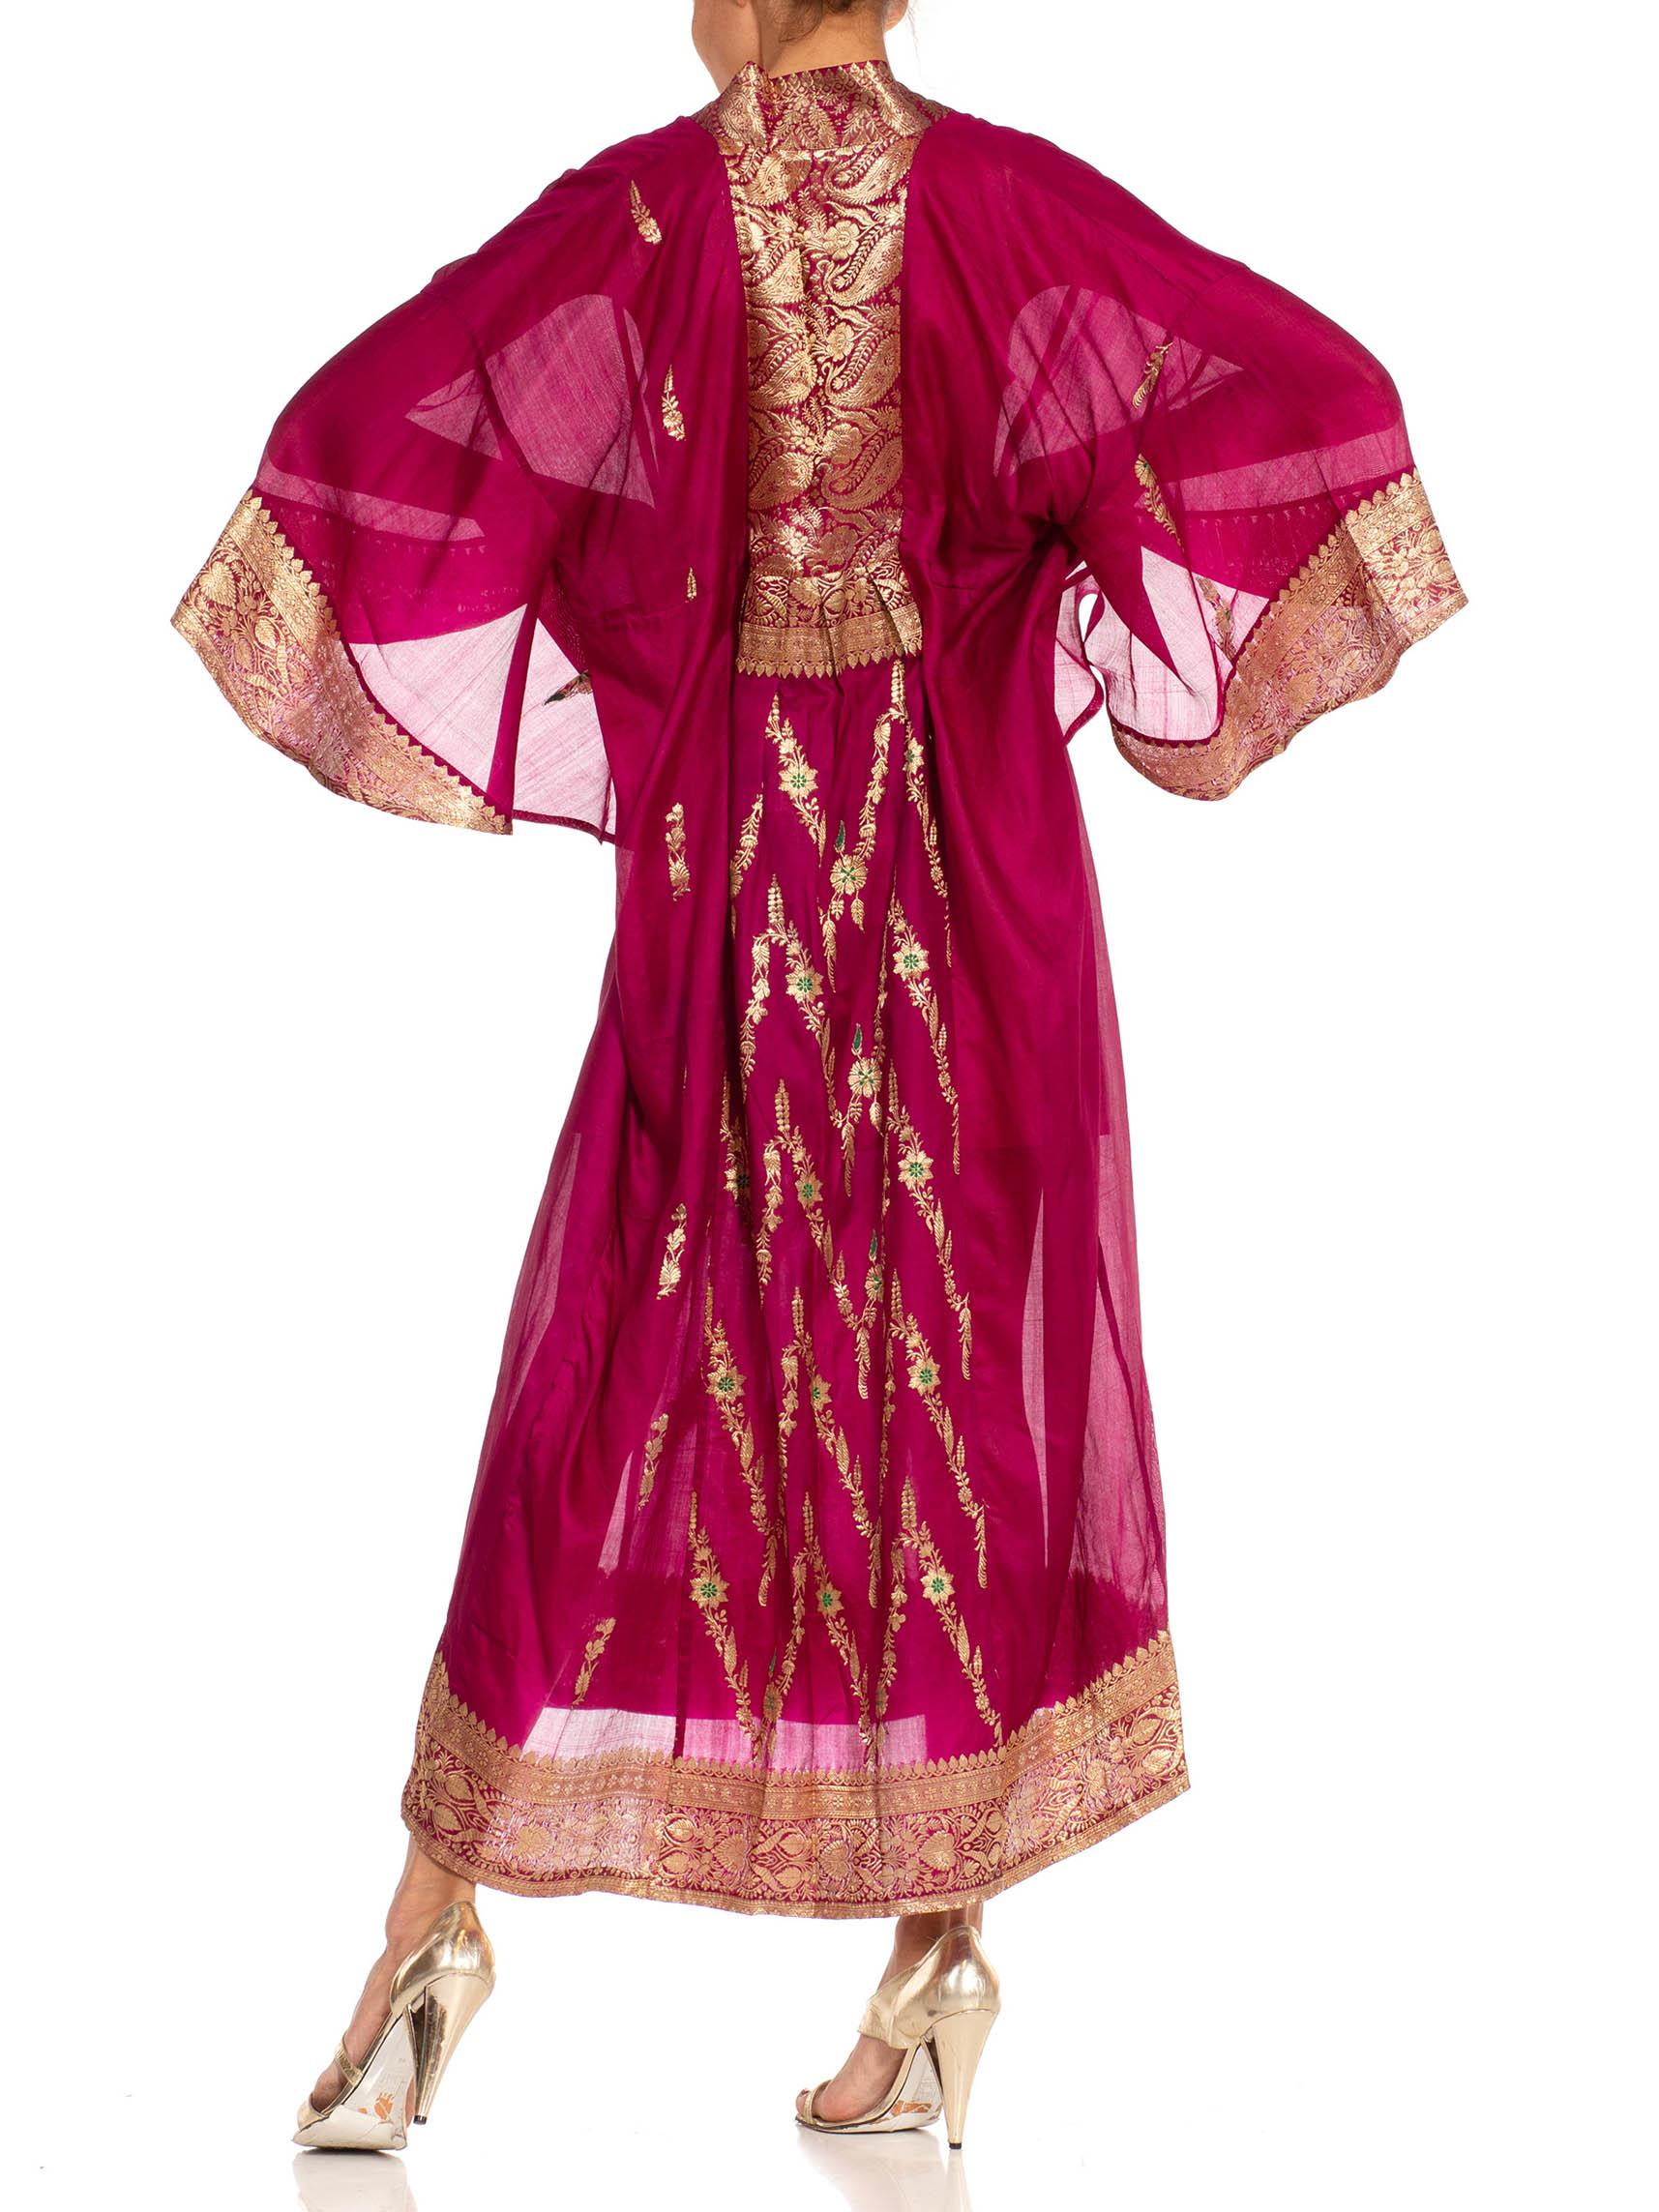 Morphew Collection Fuchsia & Gold Silk Kaftan Made From Vintage Saris In Excellent Condition For Sale In New York, NY